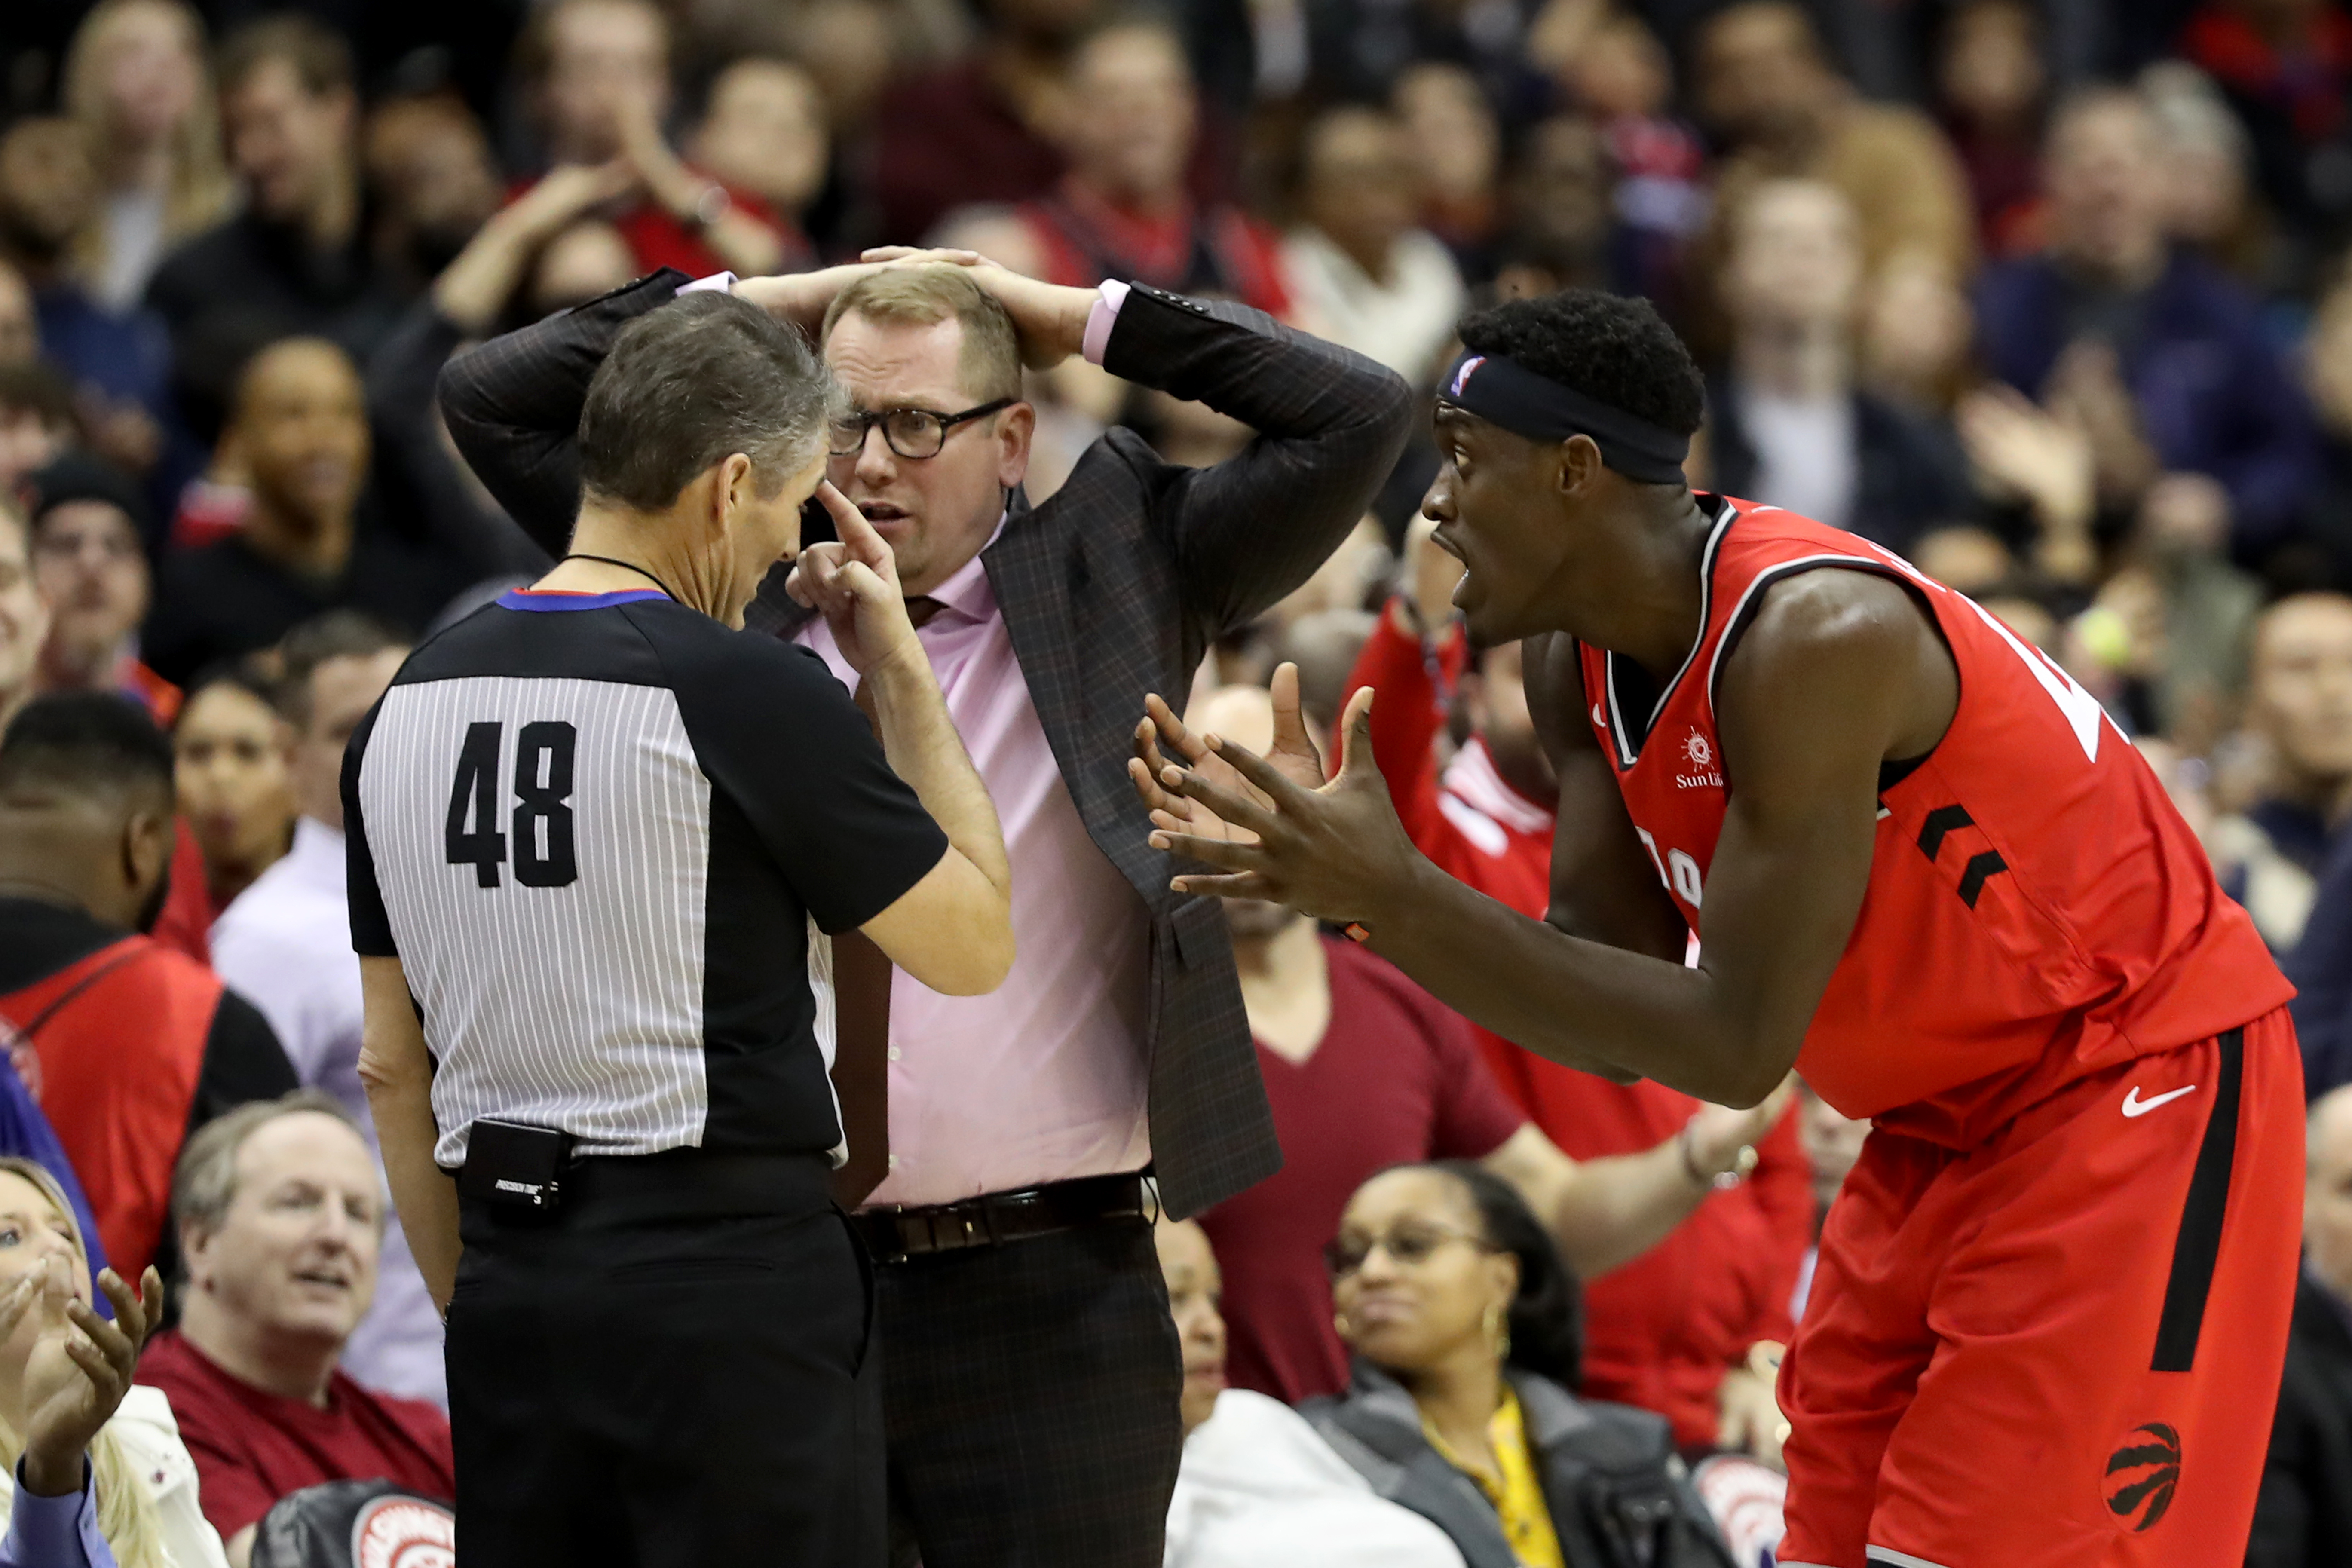 Pascal Siakam and Nick Nurse argue with an official during a Raptors game in 2019